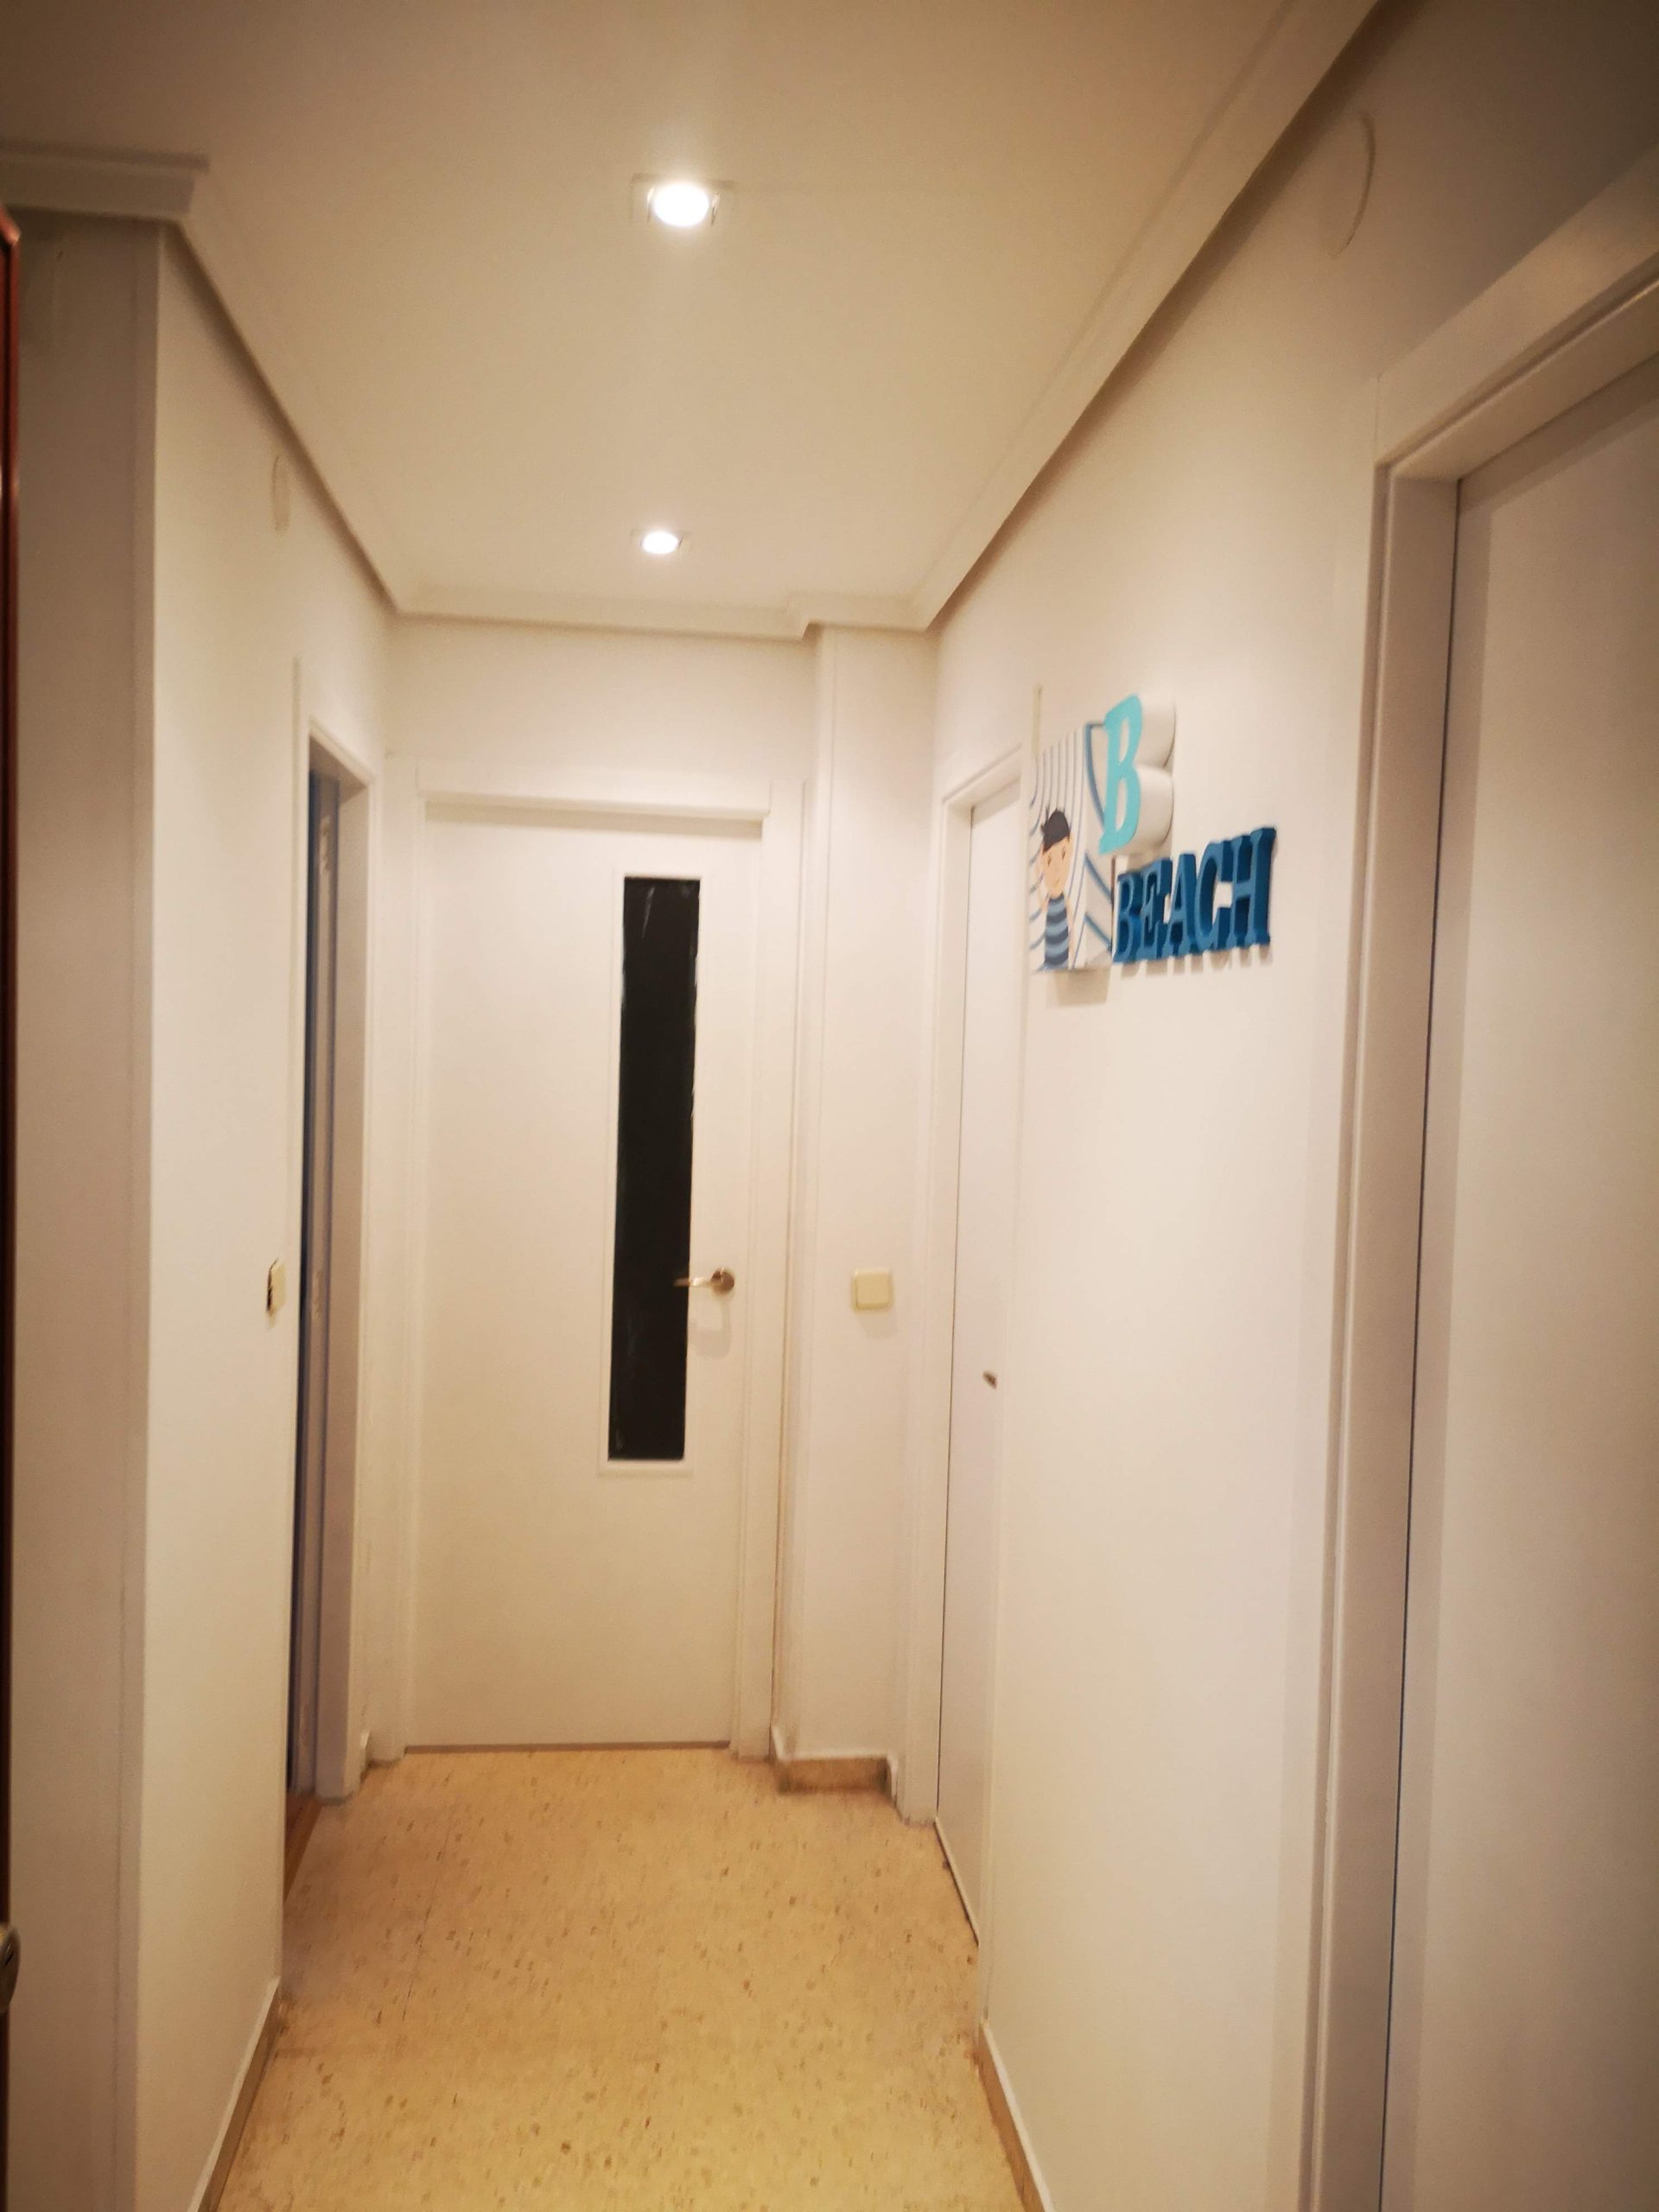 Aparment for rent in Valencia - hallway